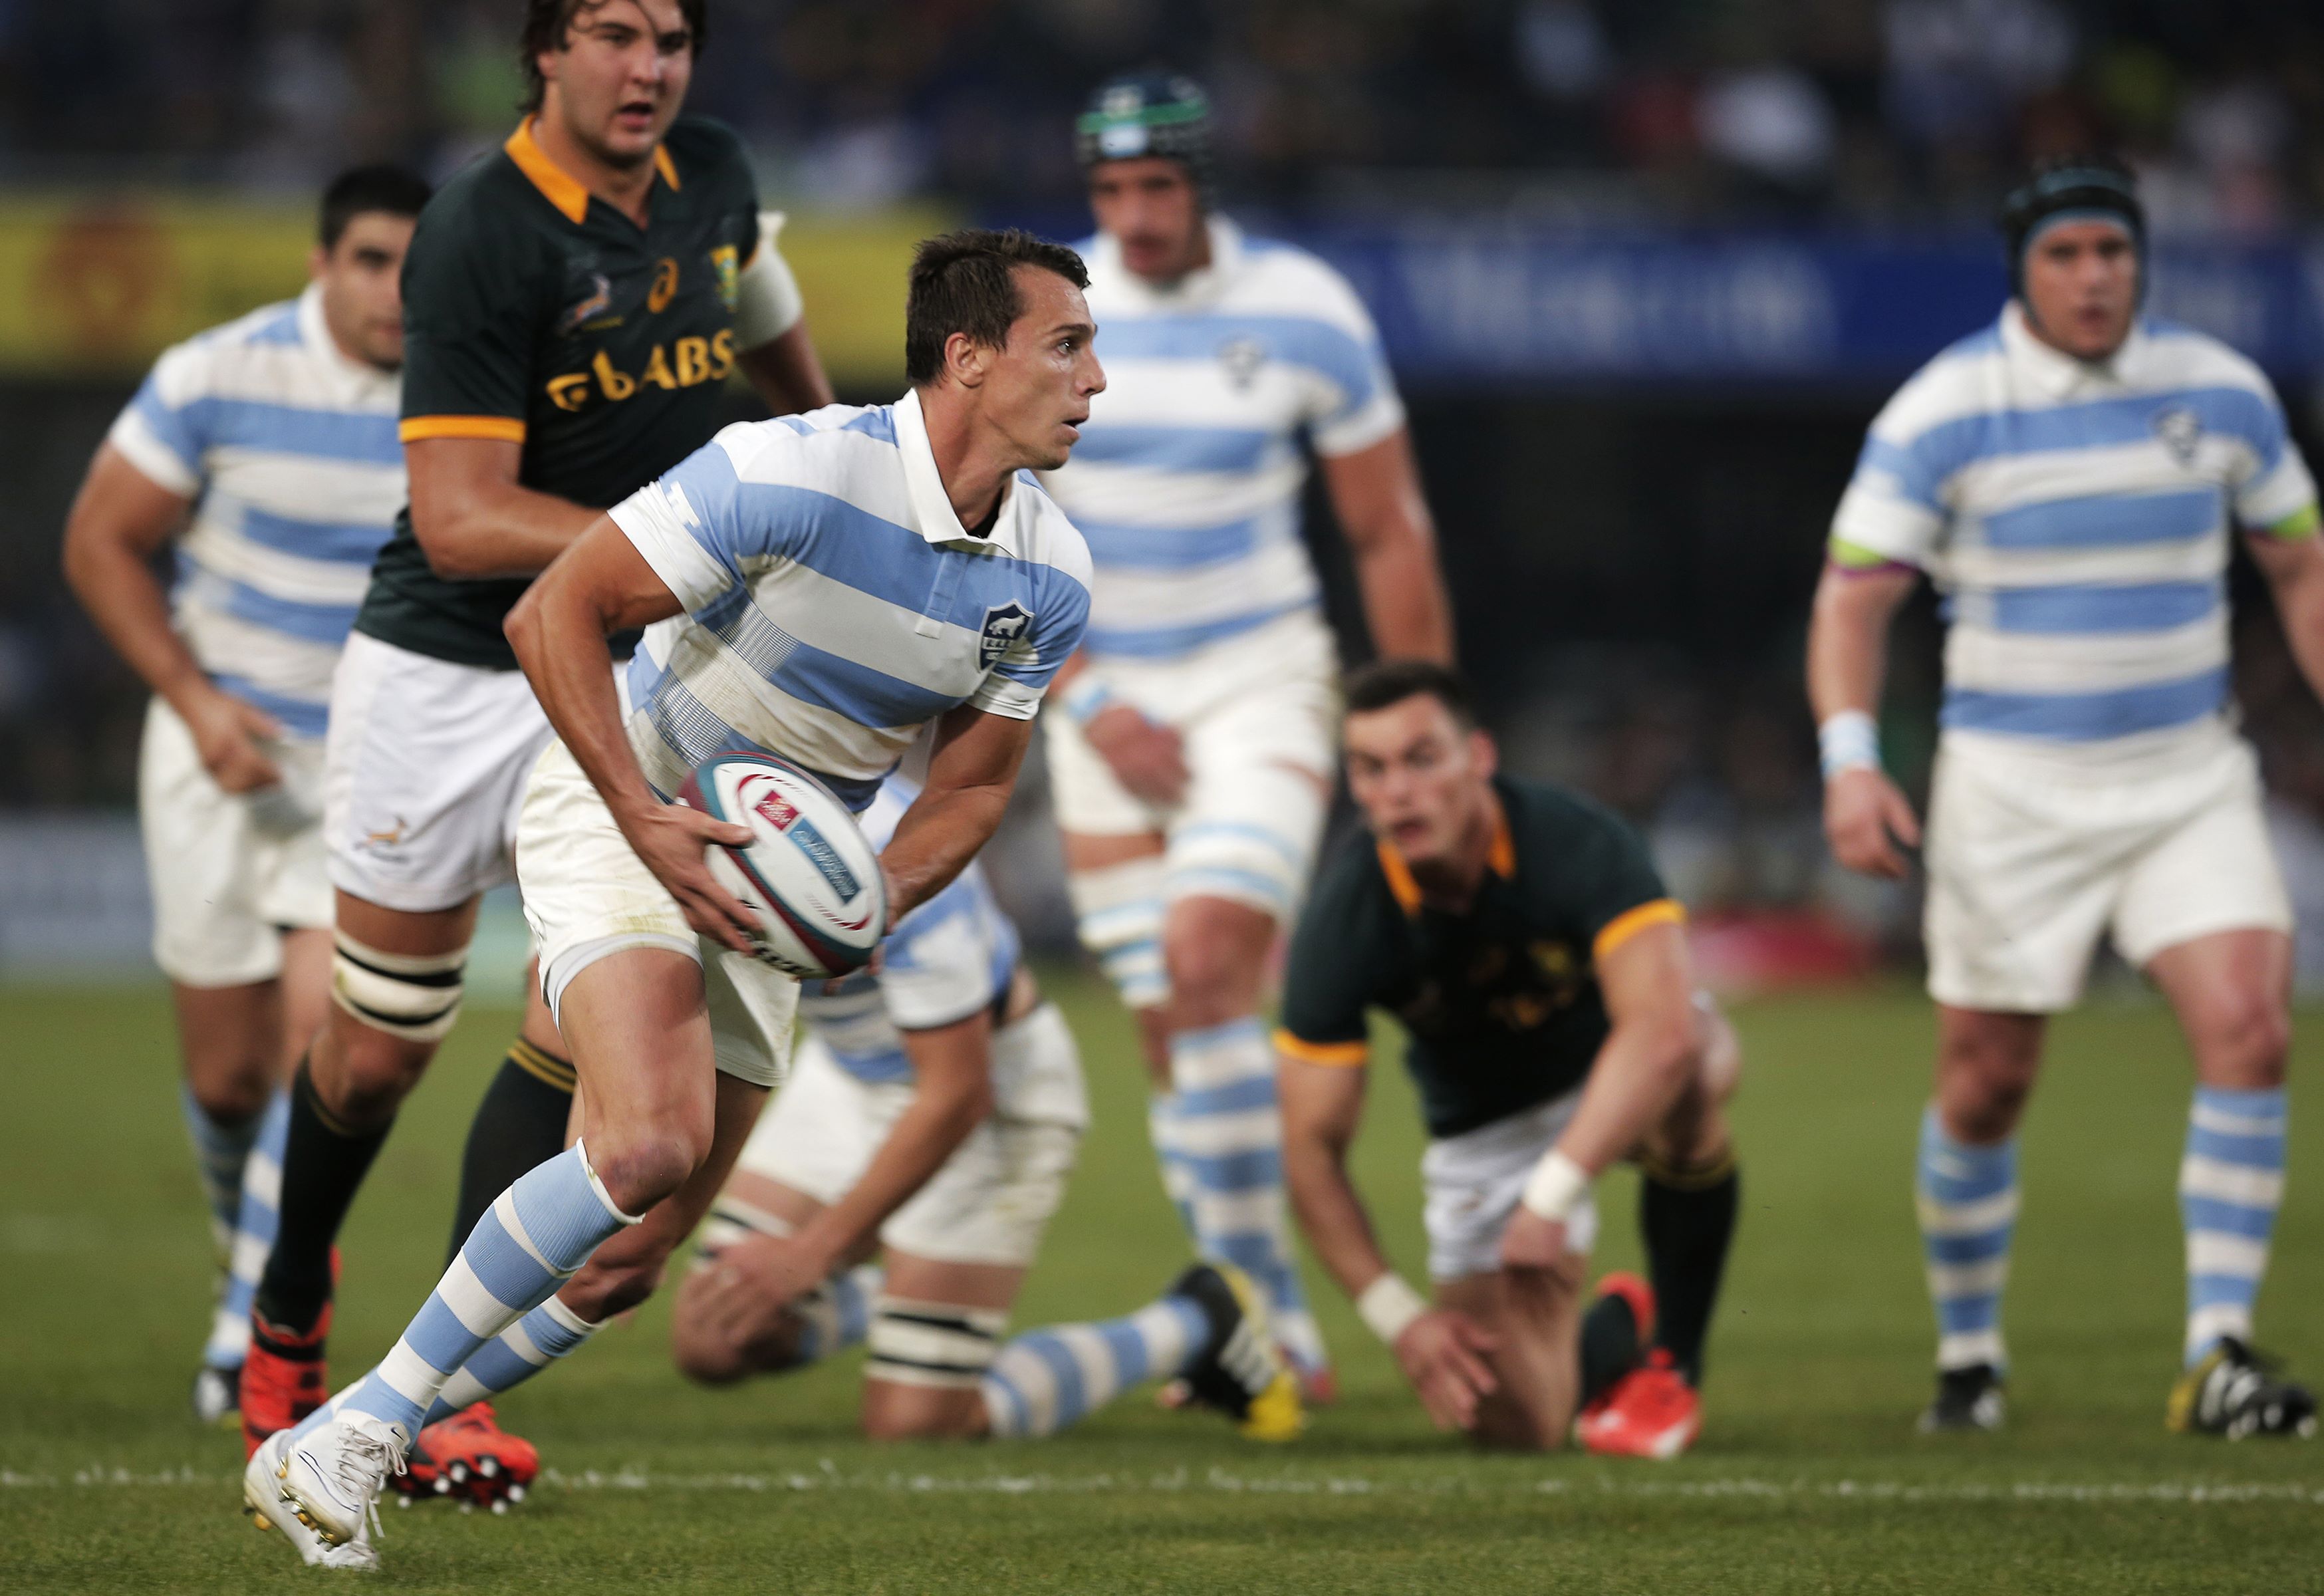 Argentina fullback Juan Imhoff clears the ball during the Rugby Championship match against South Africa in Durban. Imhoff grabbed a hat-trick of tries in Argentina's 37-25 bonus-point win. Photo: AFP